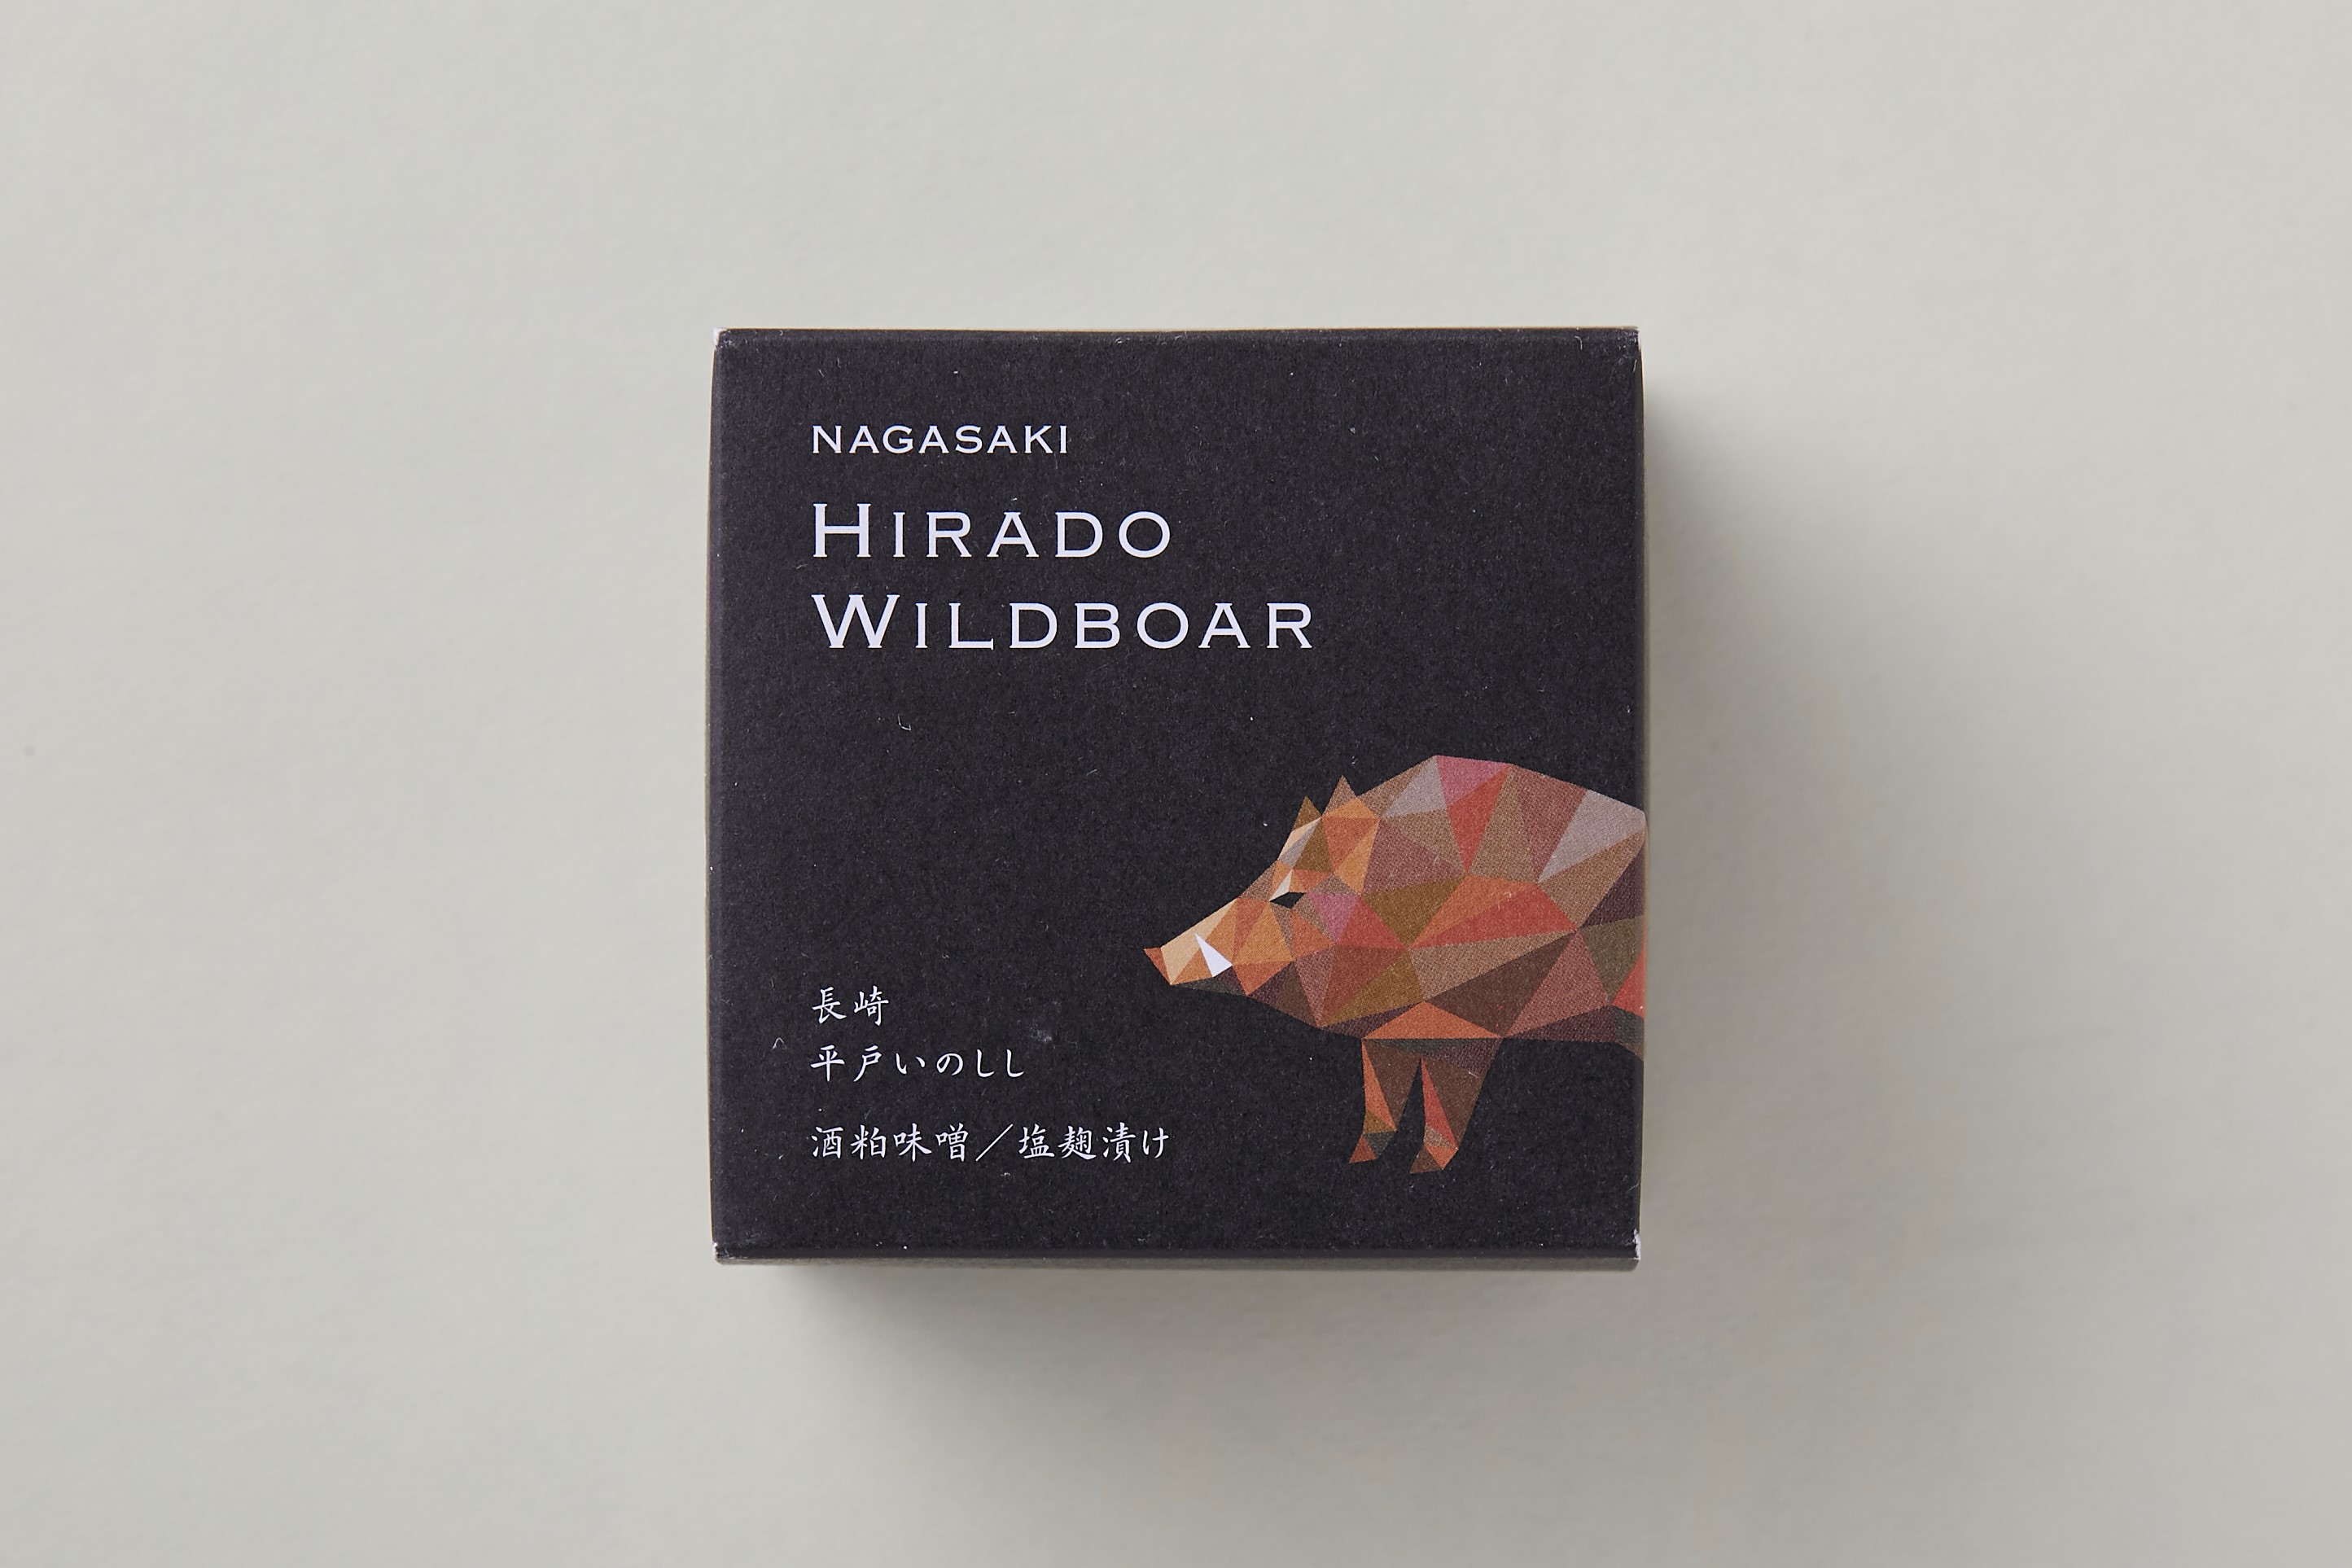 Hirado Wild Boar - Canned sushi marinated in miso with sake lees and salted malt (set of 2 cans)